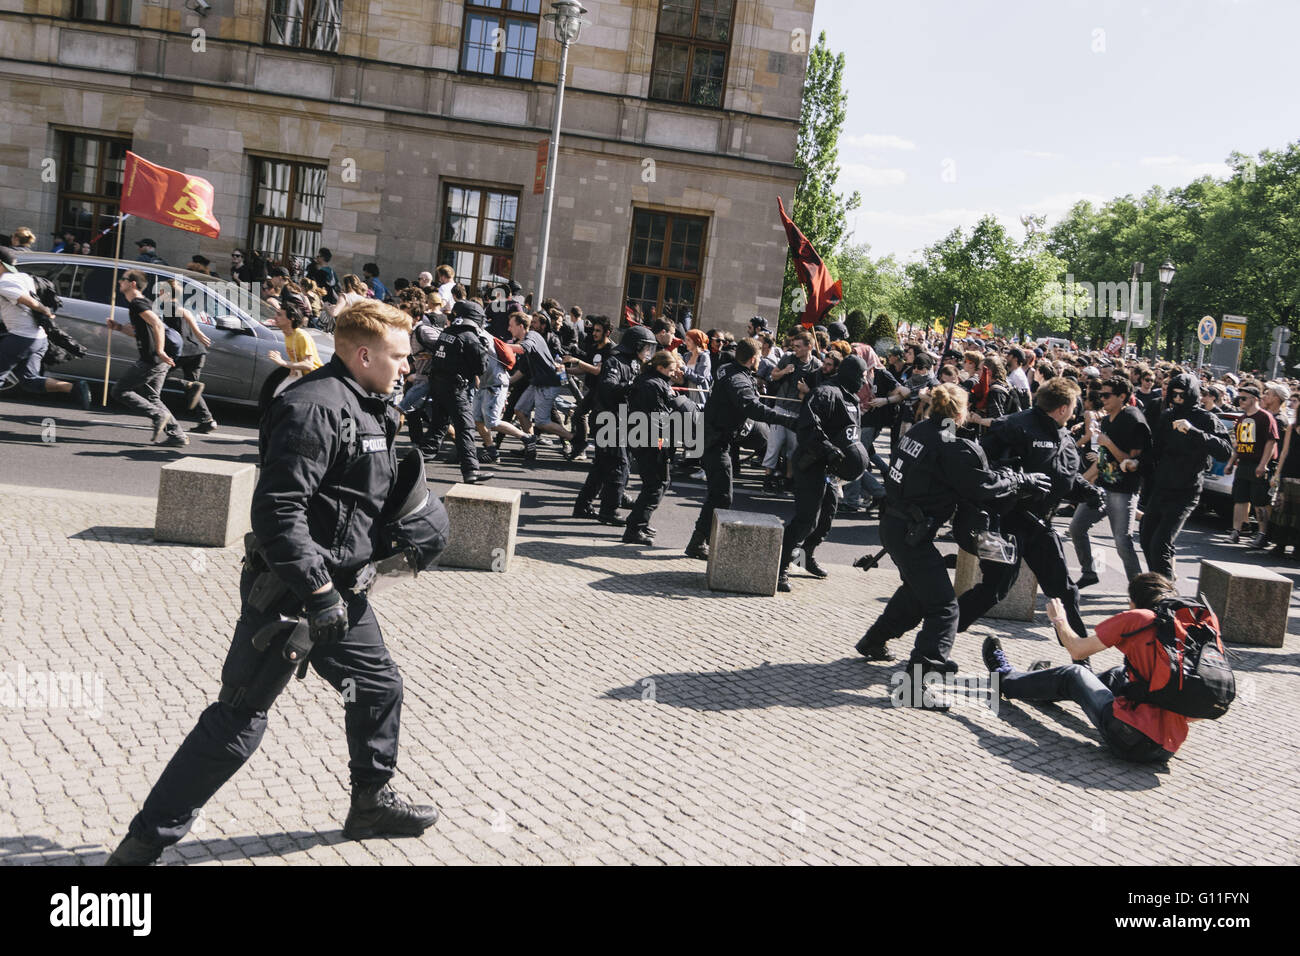 Berlin, Berlin, Germany. 7th May, 2016. Protesters try to break through a police barrier during the counter protests against the rally held under the motto 'Merkel muss weg![Merkel must go]' organised by far-right group 'We for Berlin & We for Germany' Credit:  Jan Scheunert/ZUMA Wire/Alamy Live News Stock Photo